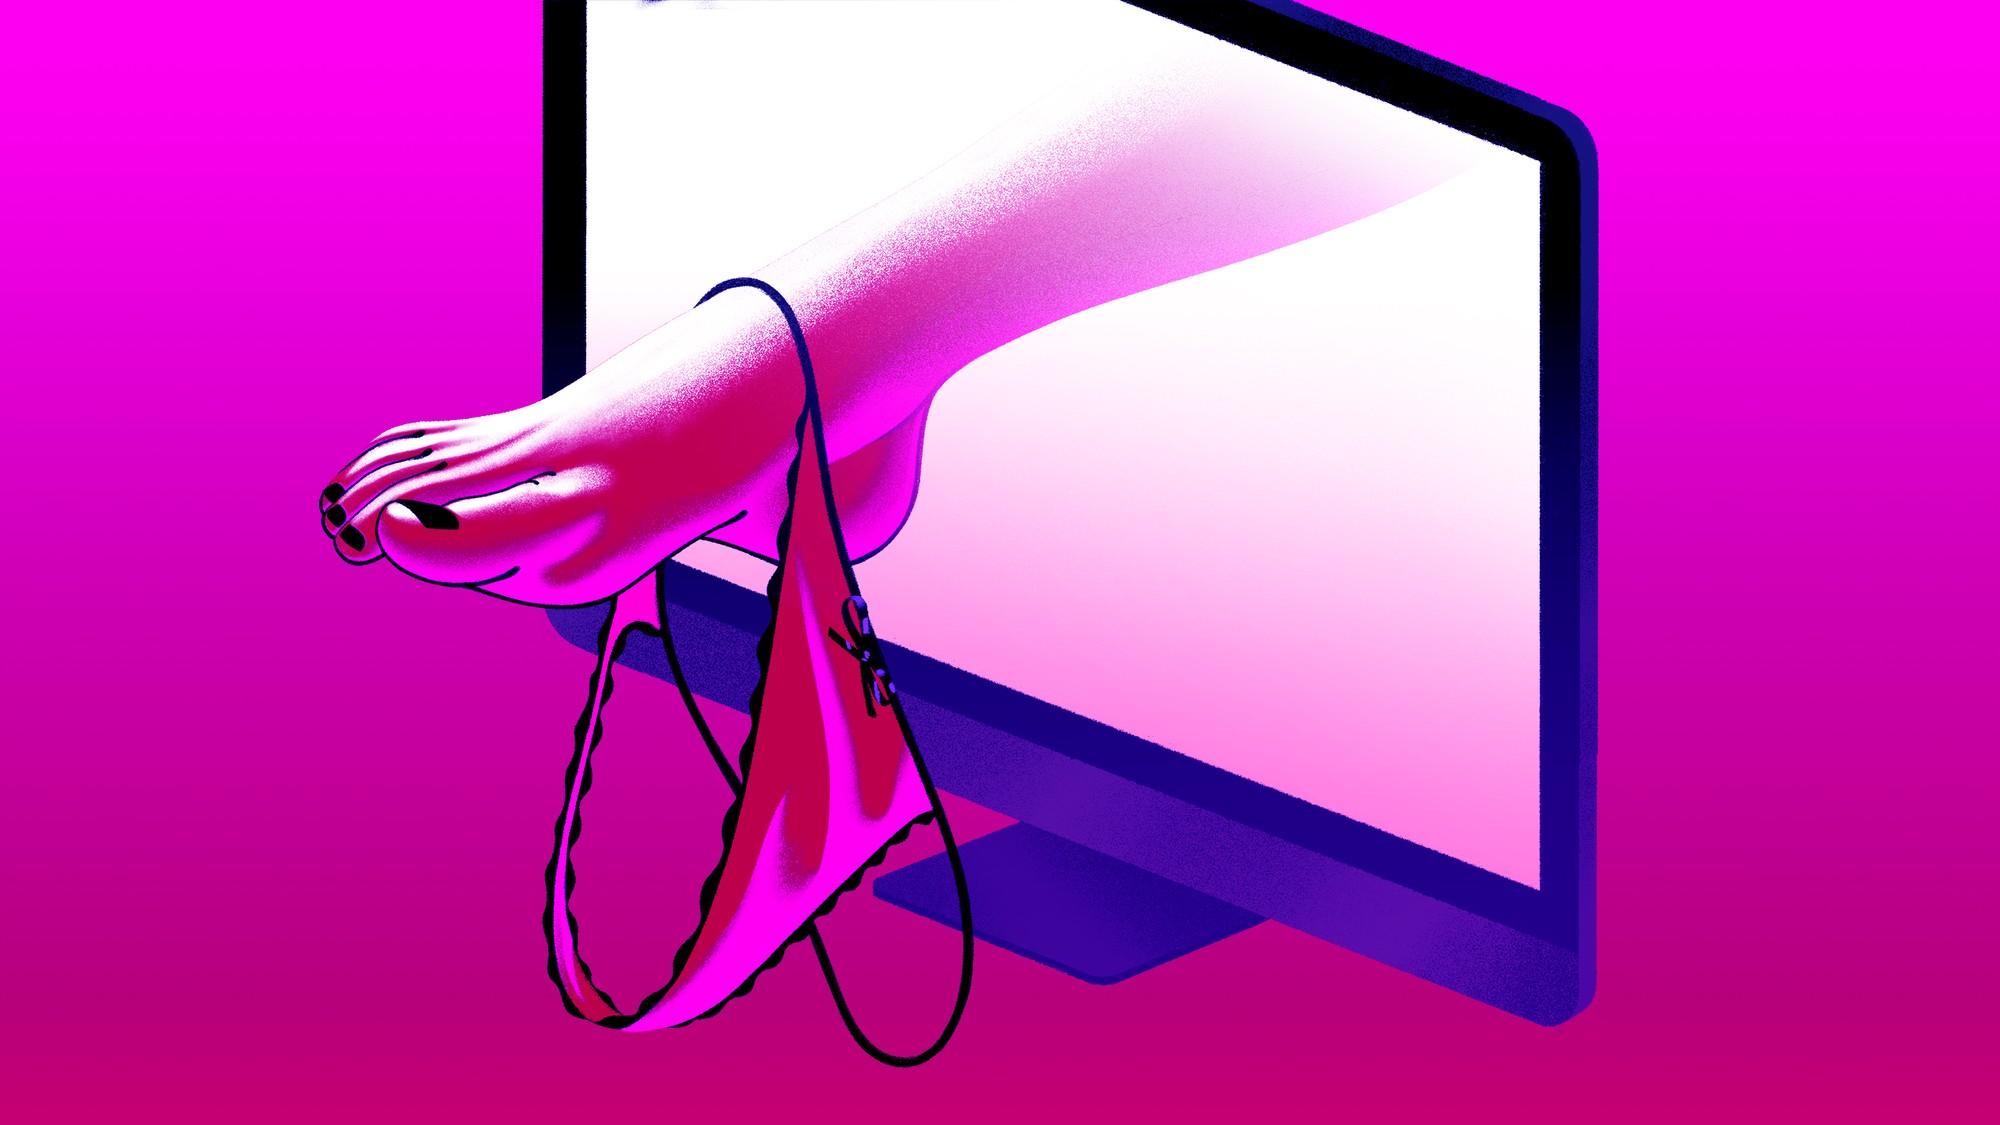 “Selling Used Panties Online Is Harder Than You Think,” VICE